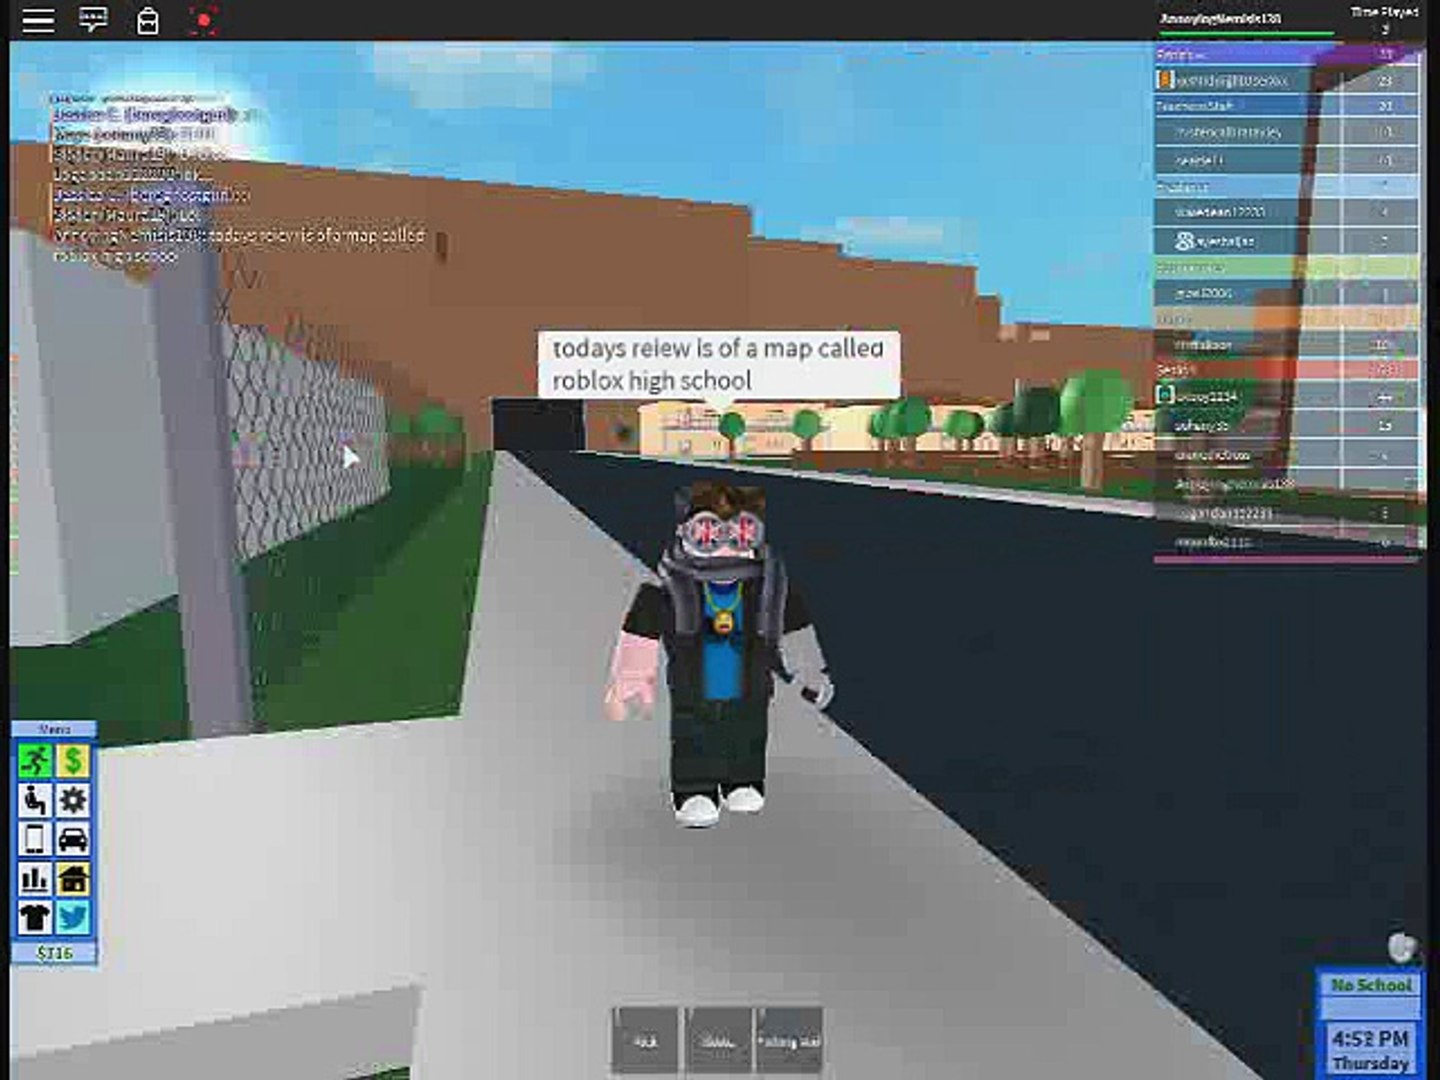 Roblox Map Review 3 Roblox High School Video Dailymotion - roblox high school videos